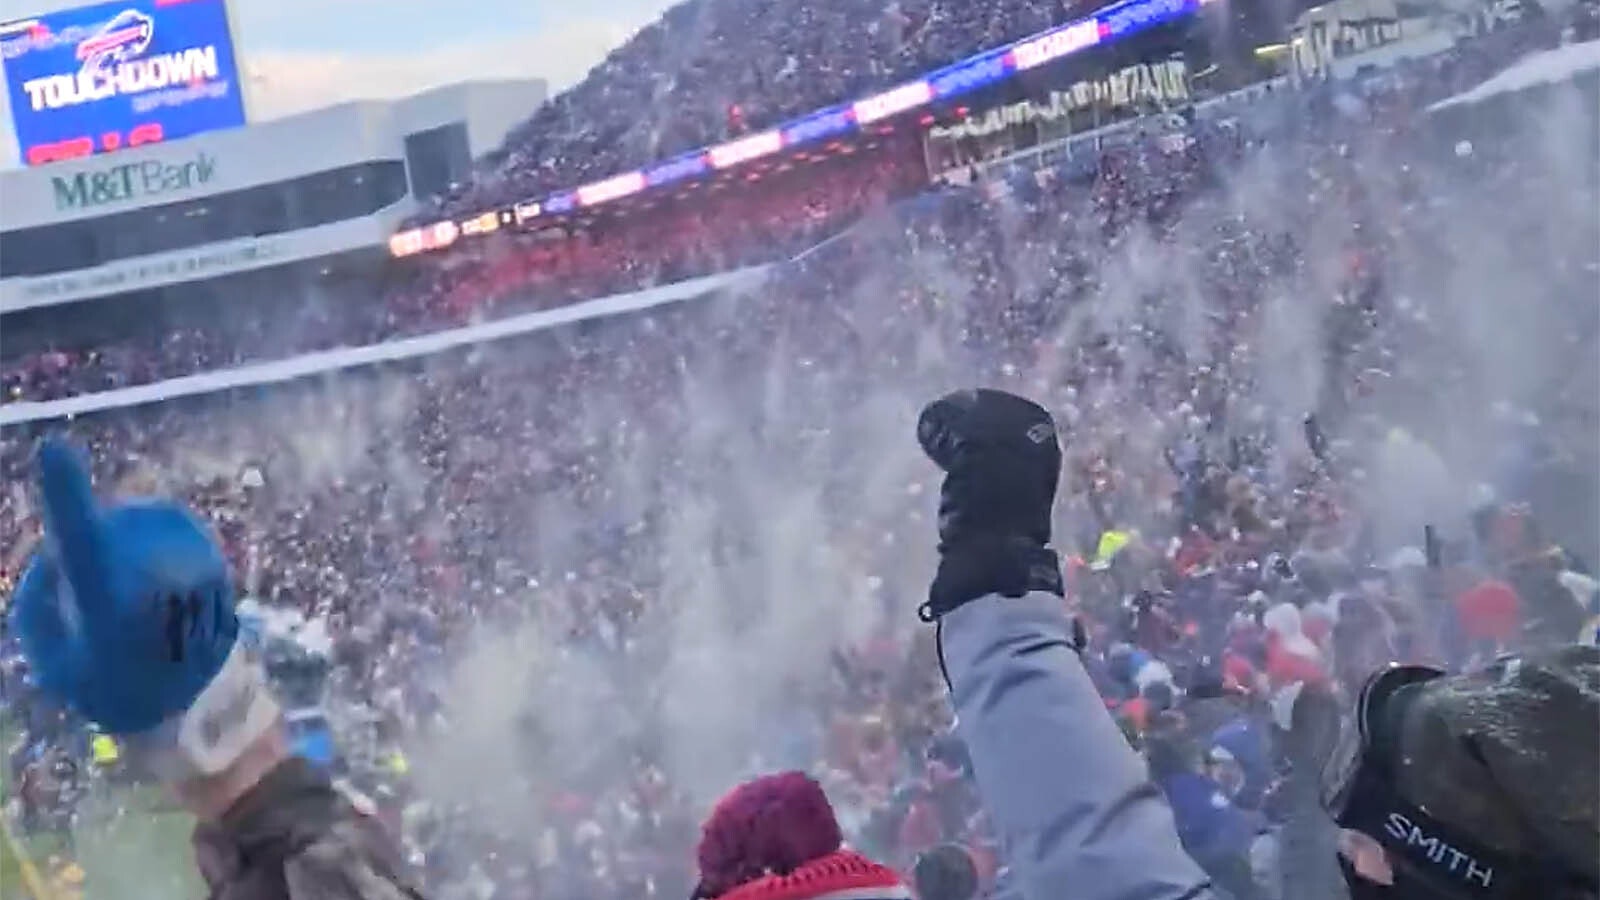 After scoring a touchdown against the Pittsburgh Steelers last week, Buffalo Bills fans celebrate by throwing handfuls of snow.